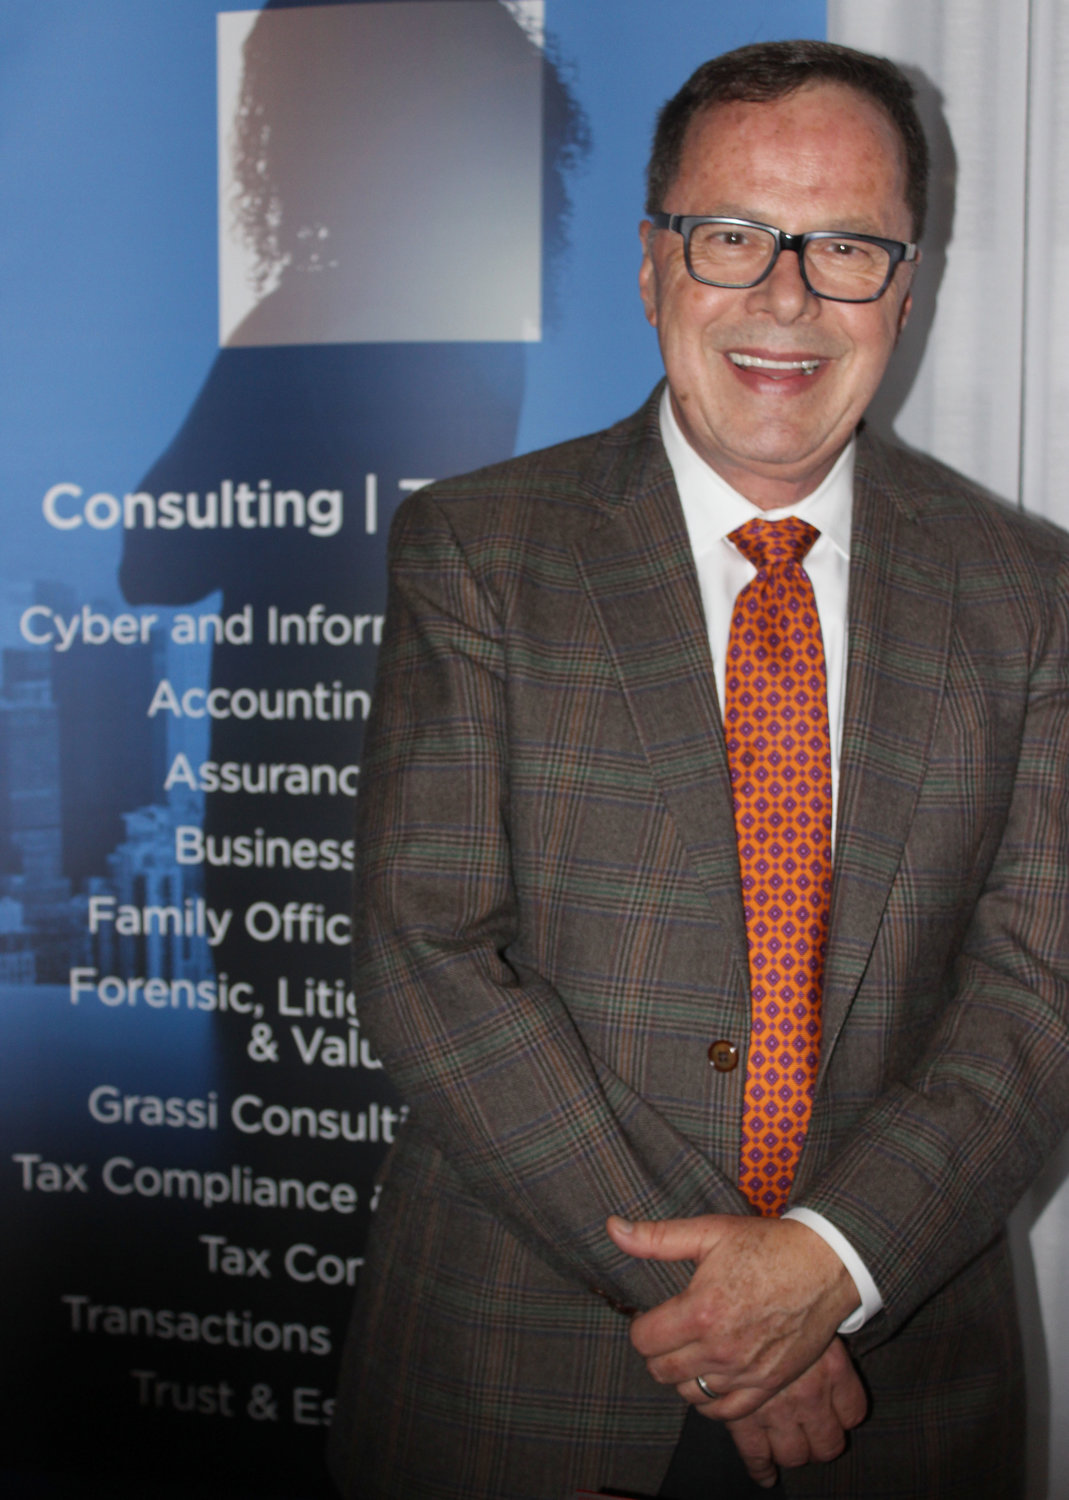 Joe Bruha, senior marketing manager of Grassi and Co., spoke to guests about the company and its mission to support local lawyers with accounting and auditing services.